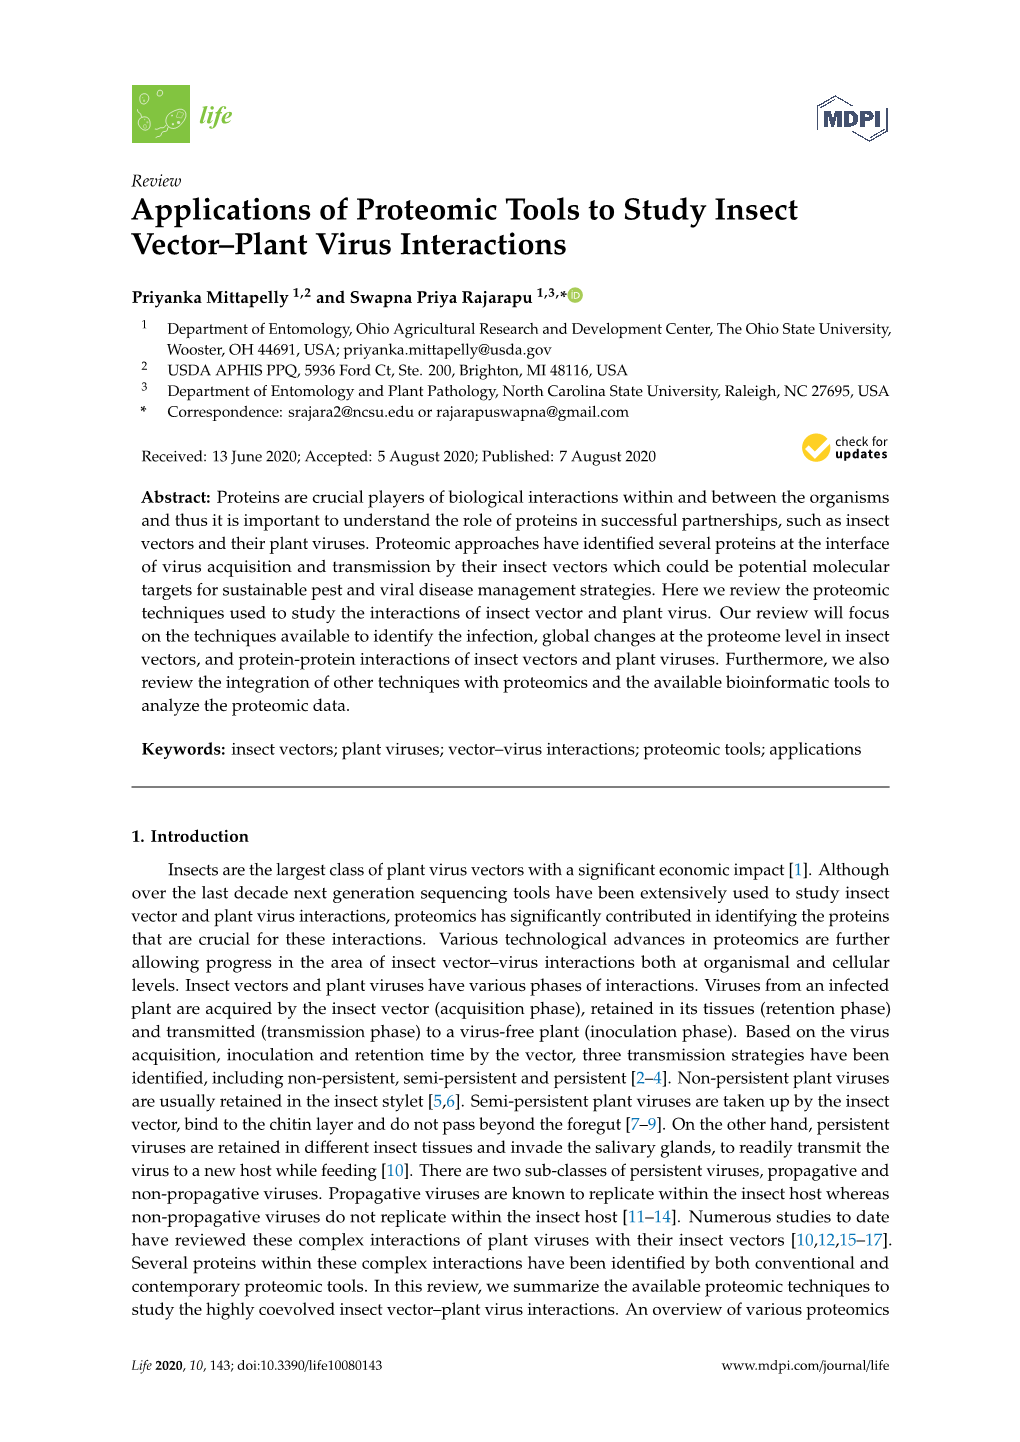 Applications of Proteomic Tools to Study Insect Vector–Plant Virus Interactions